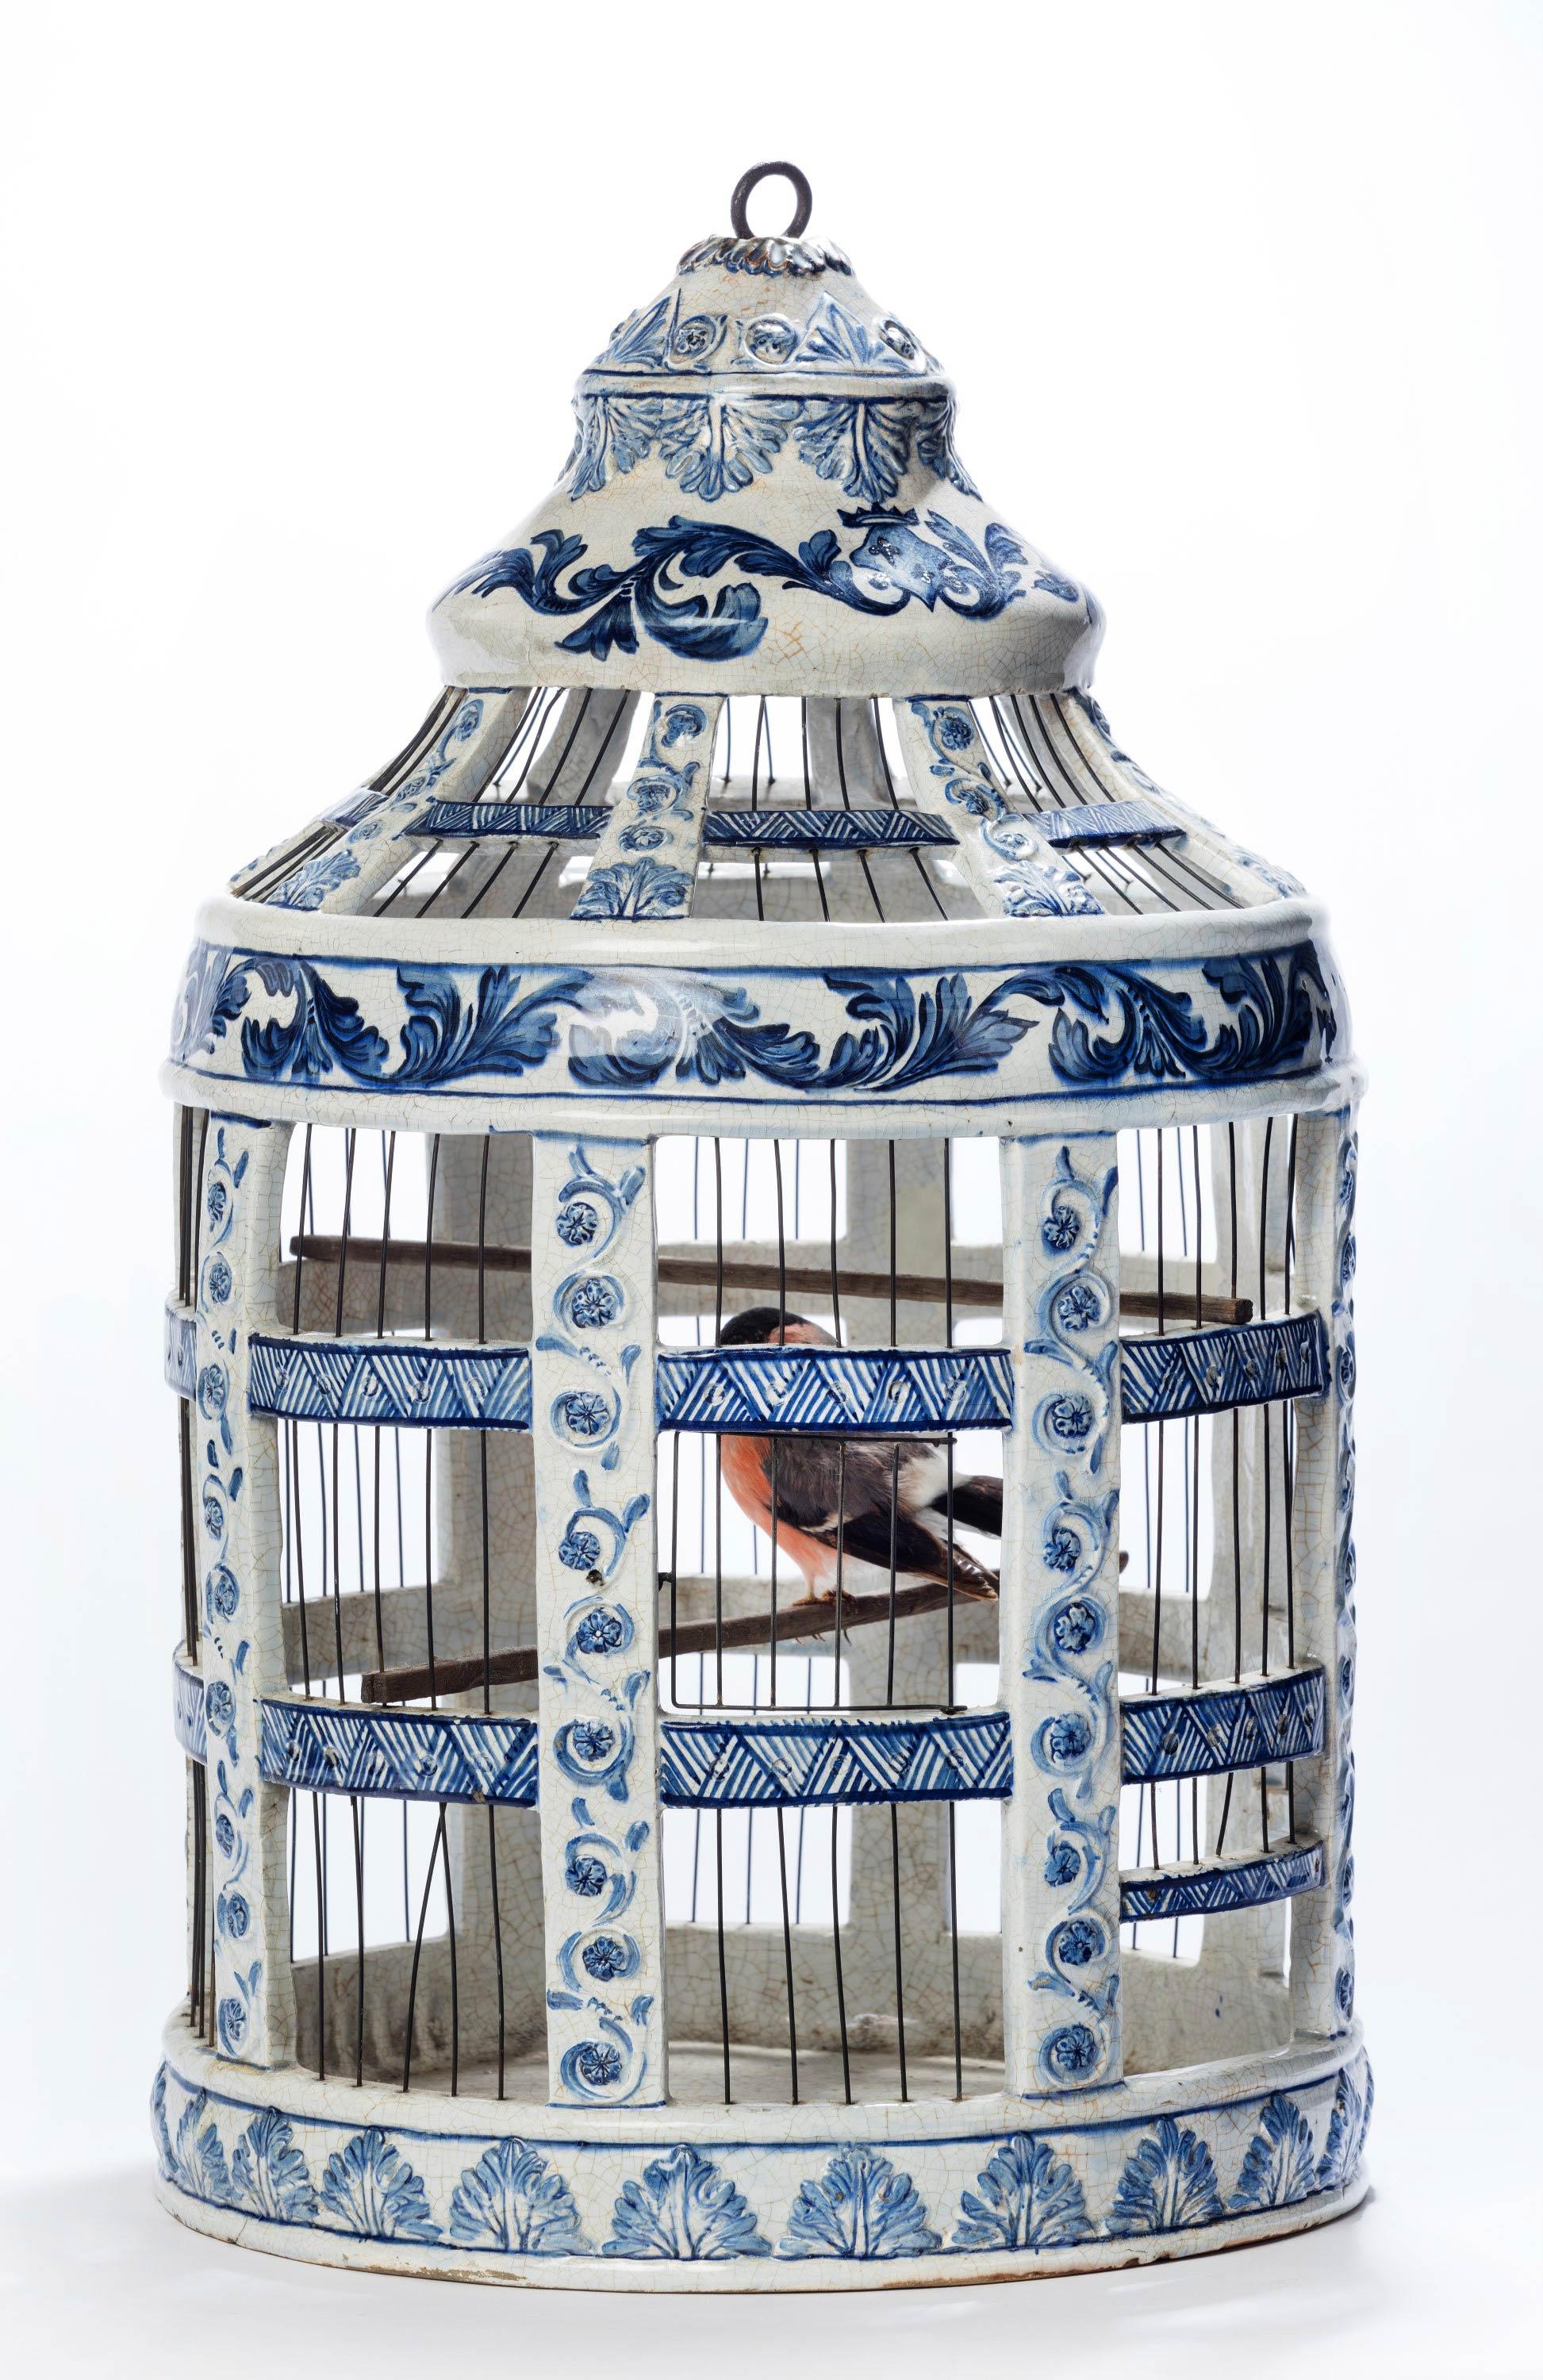 Pottery Extremely Rare 18th Century Dutch, Delft, Blue and White Birdcage